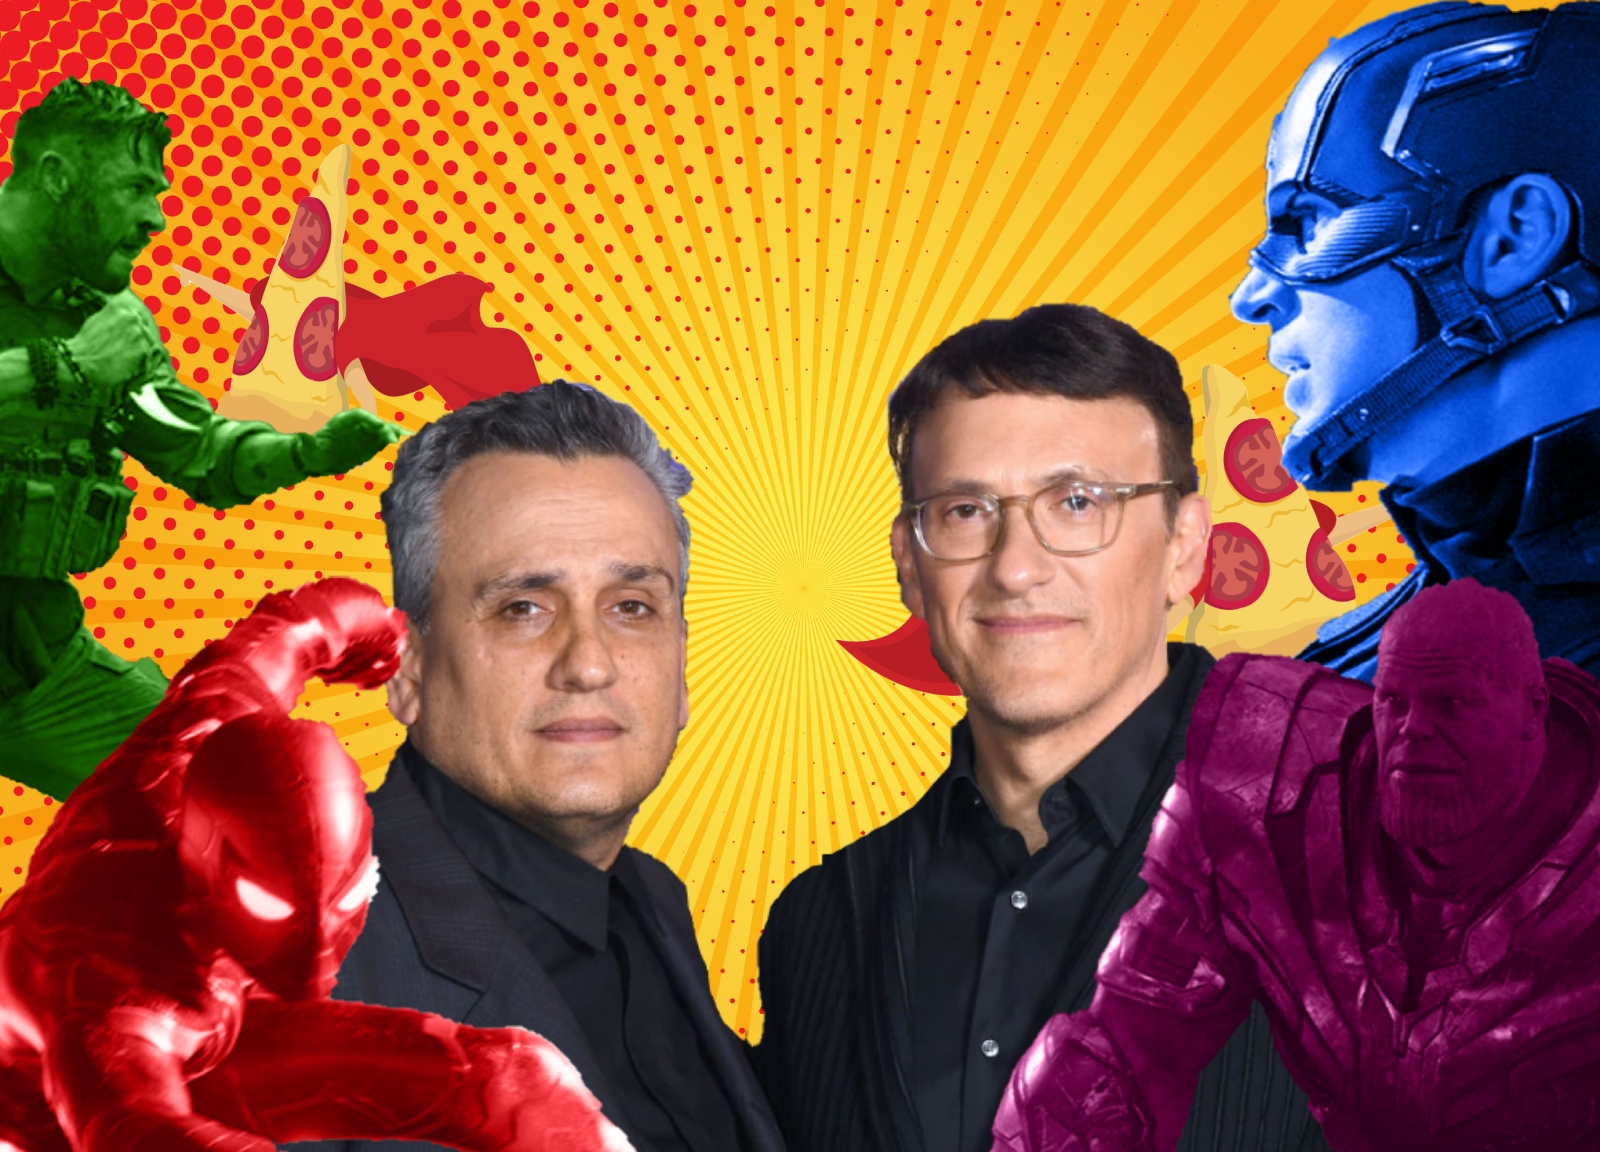 Russo Brothers Interview Making The Perfect Movie, ‘Star Wars